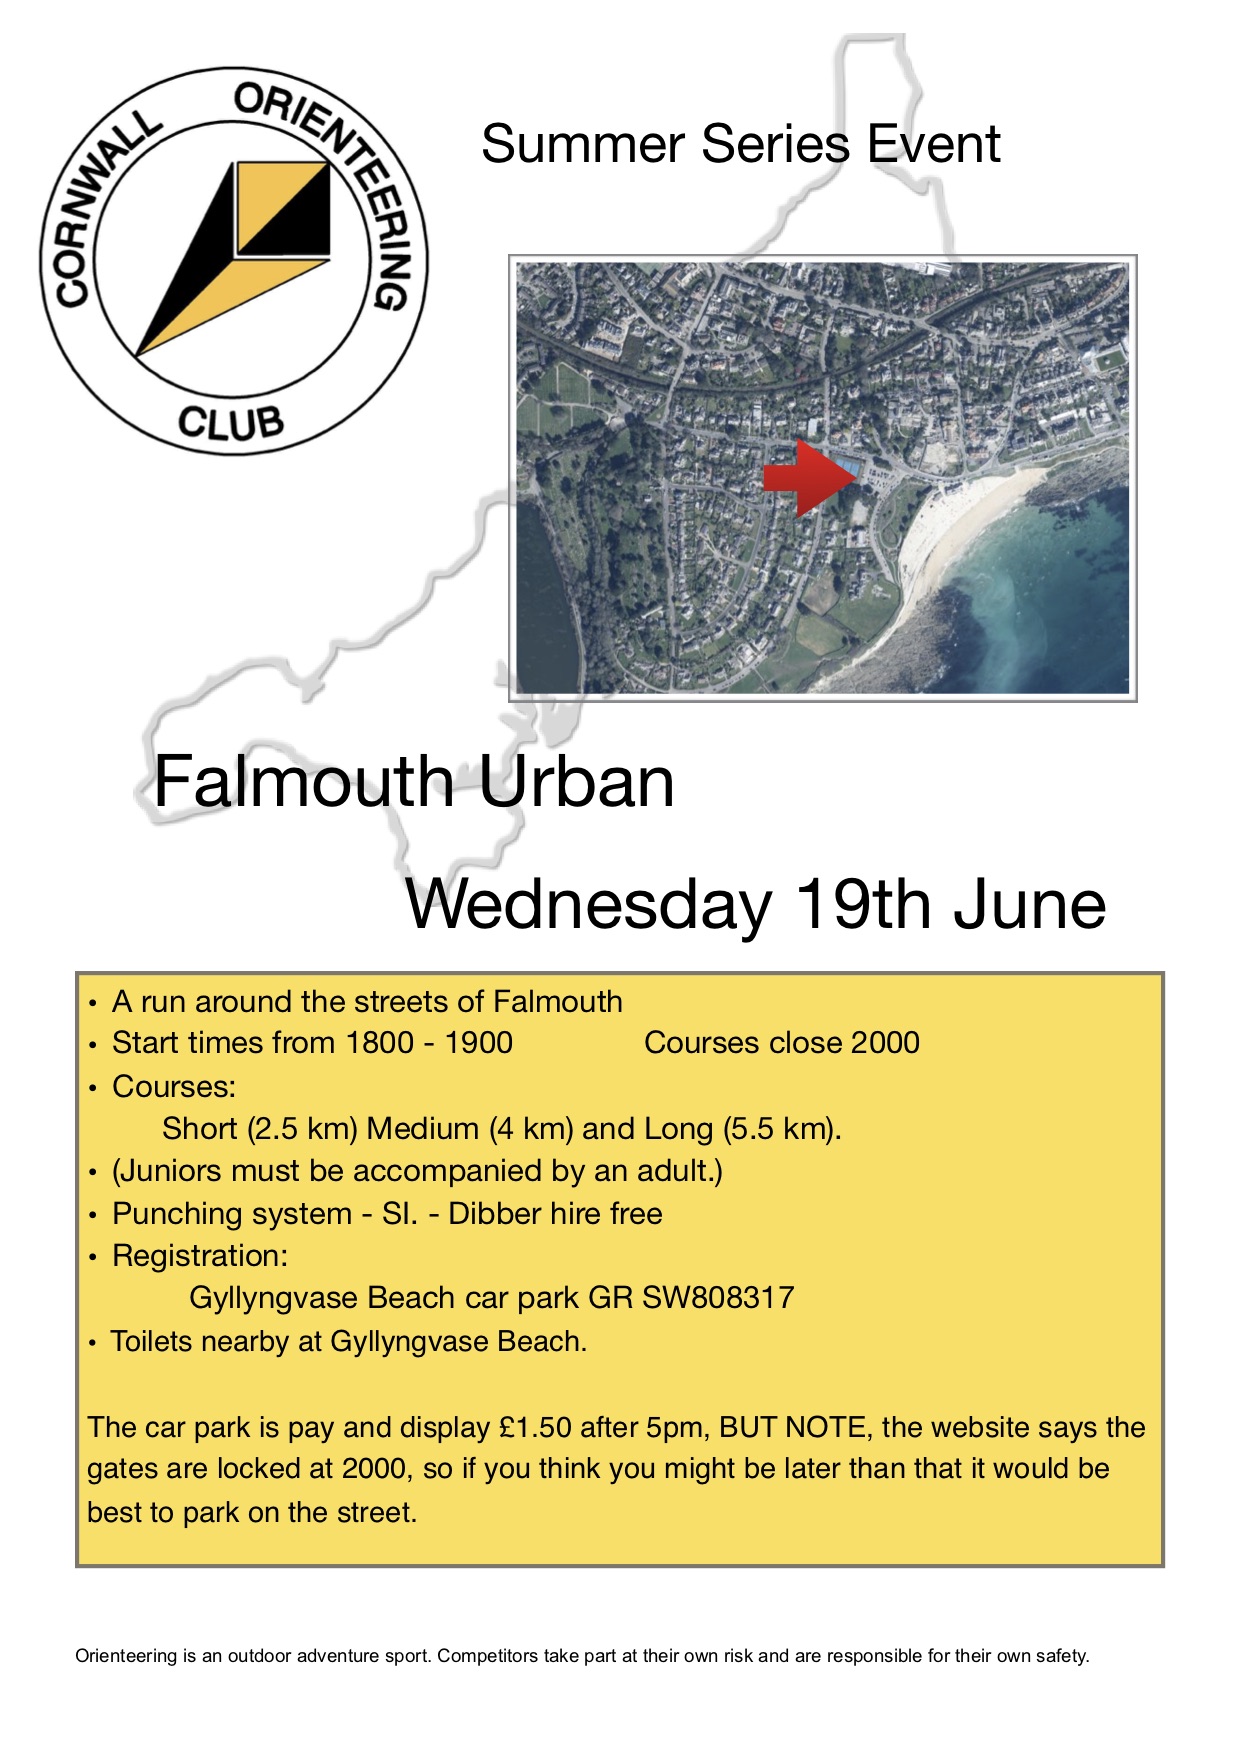 Flyer for falmouth event